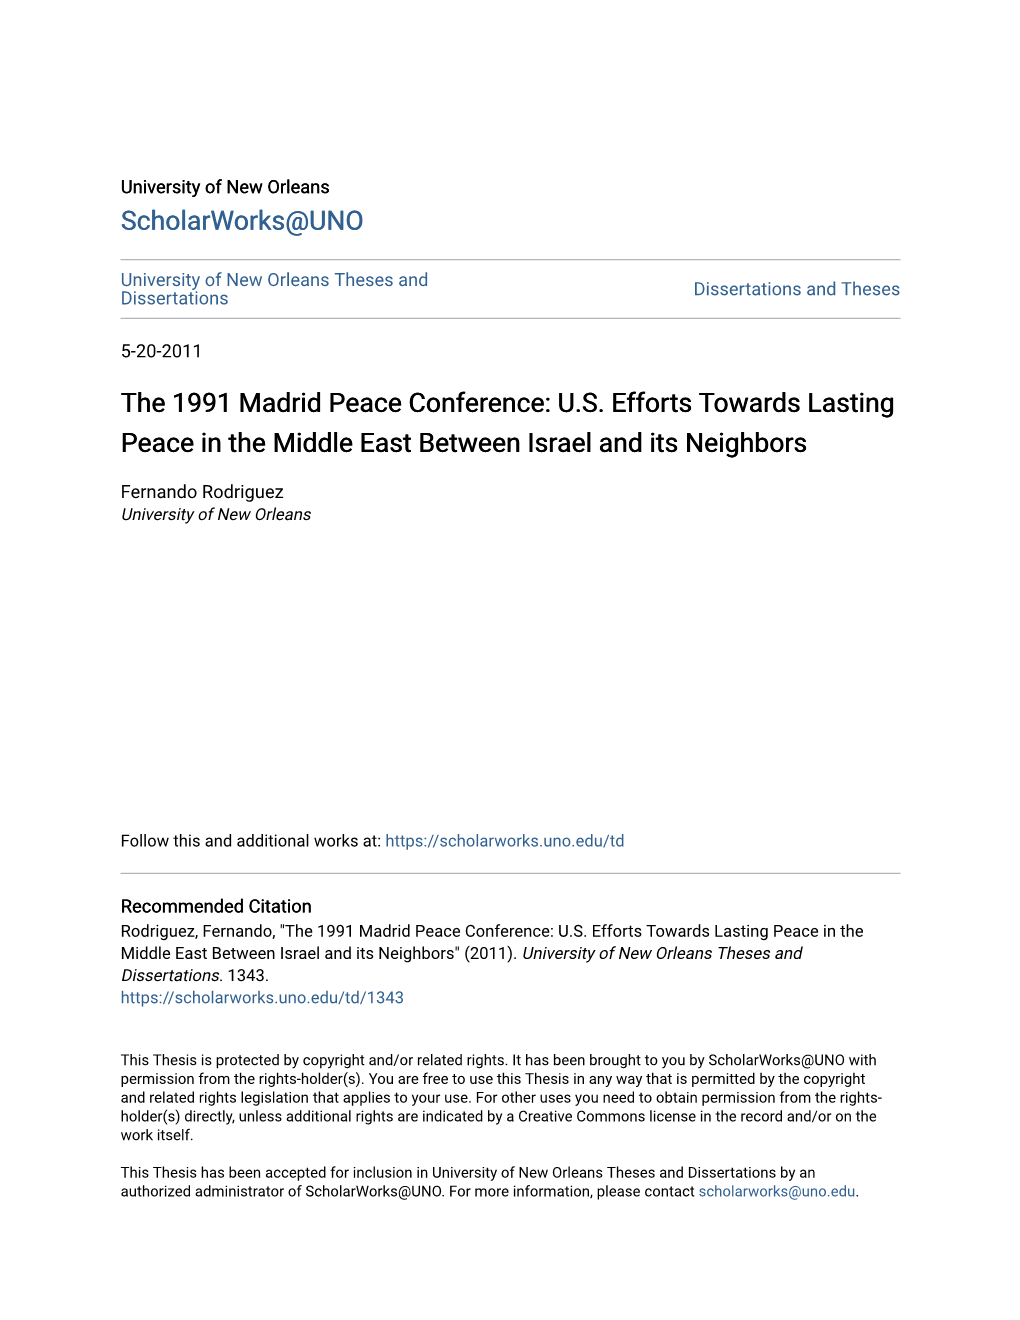 The 1991 Madrid Peace Conference: U.S